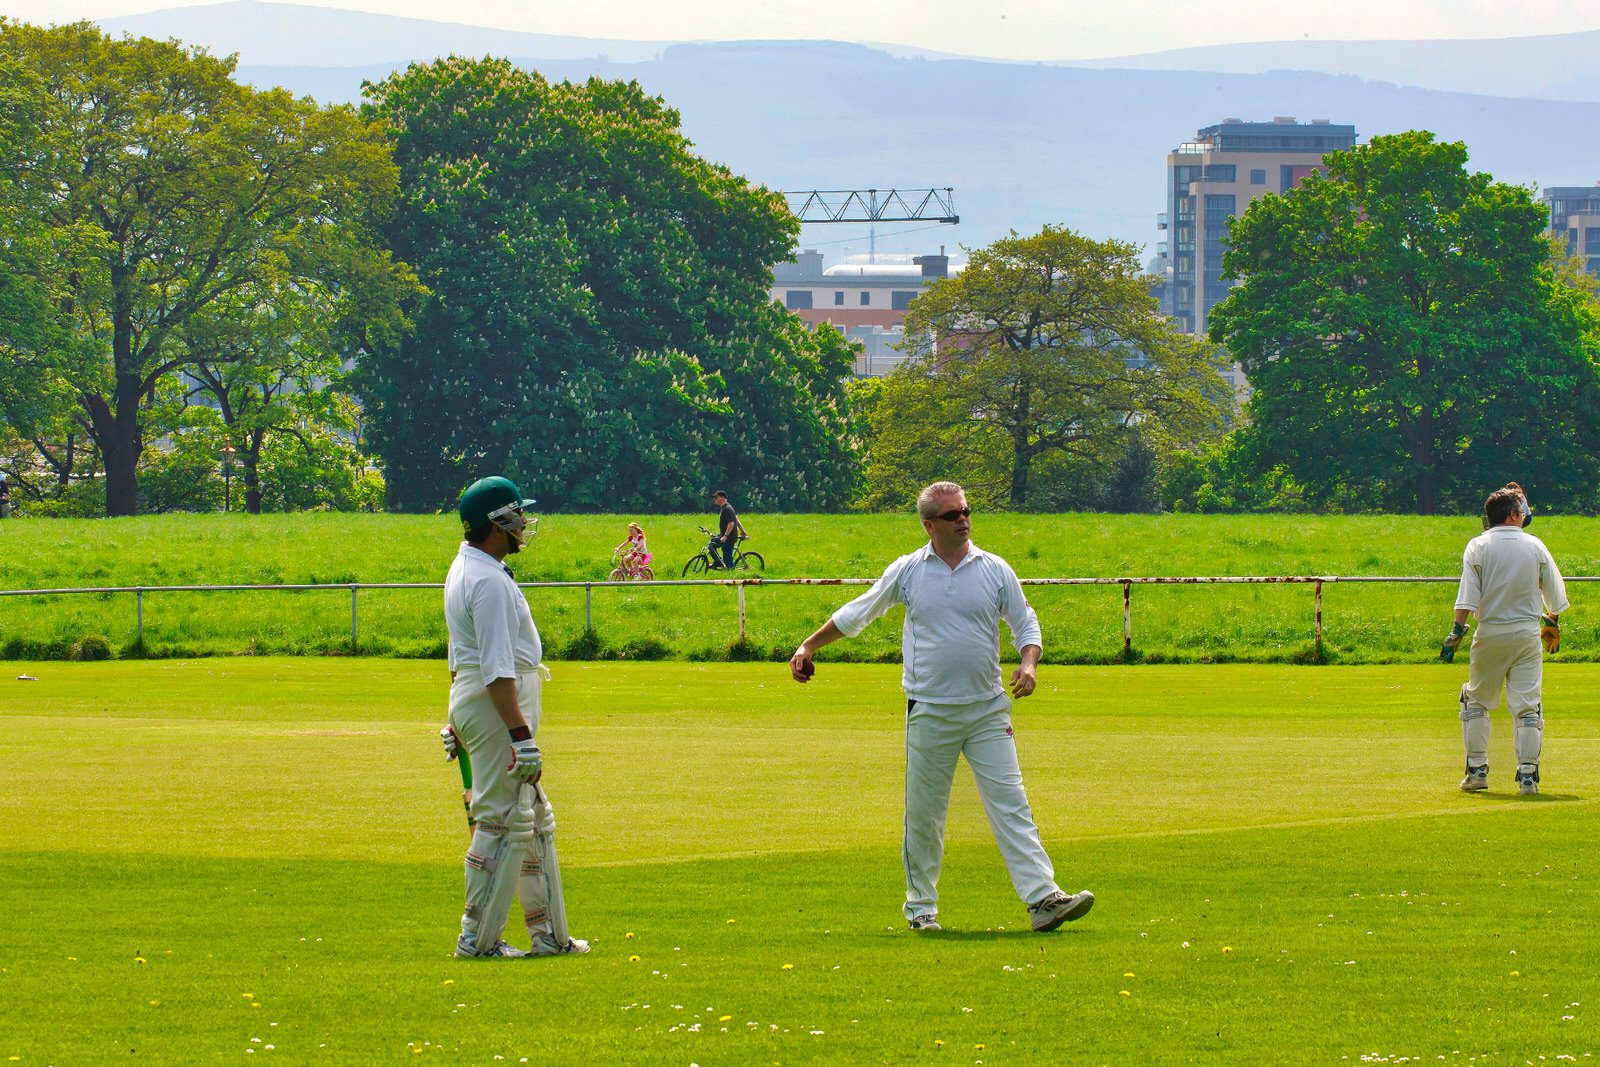 TWO CRICKET CLUBS IN PHOENIX PARK NEAR THE WELLINGTON MONUMENT 007